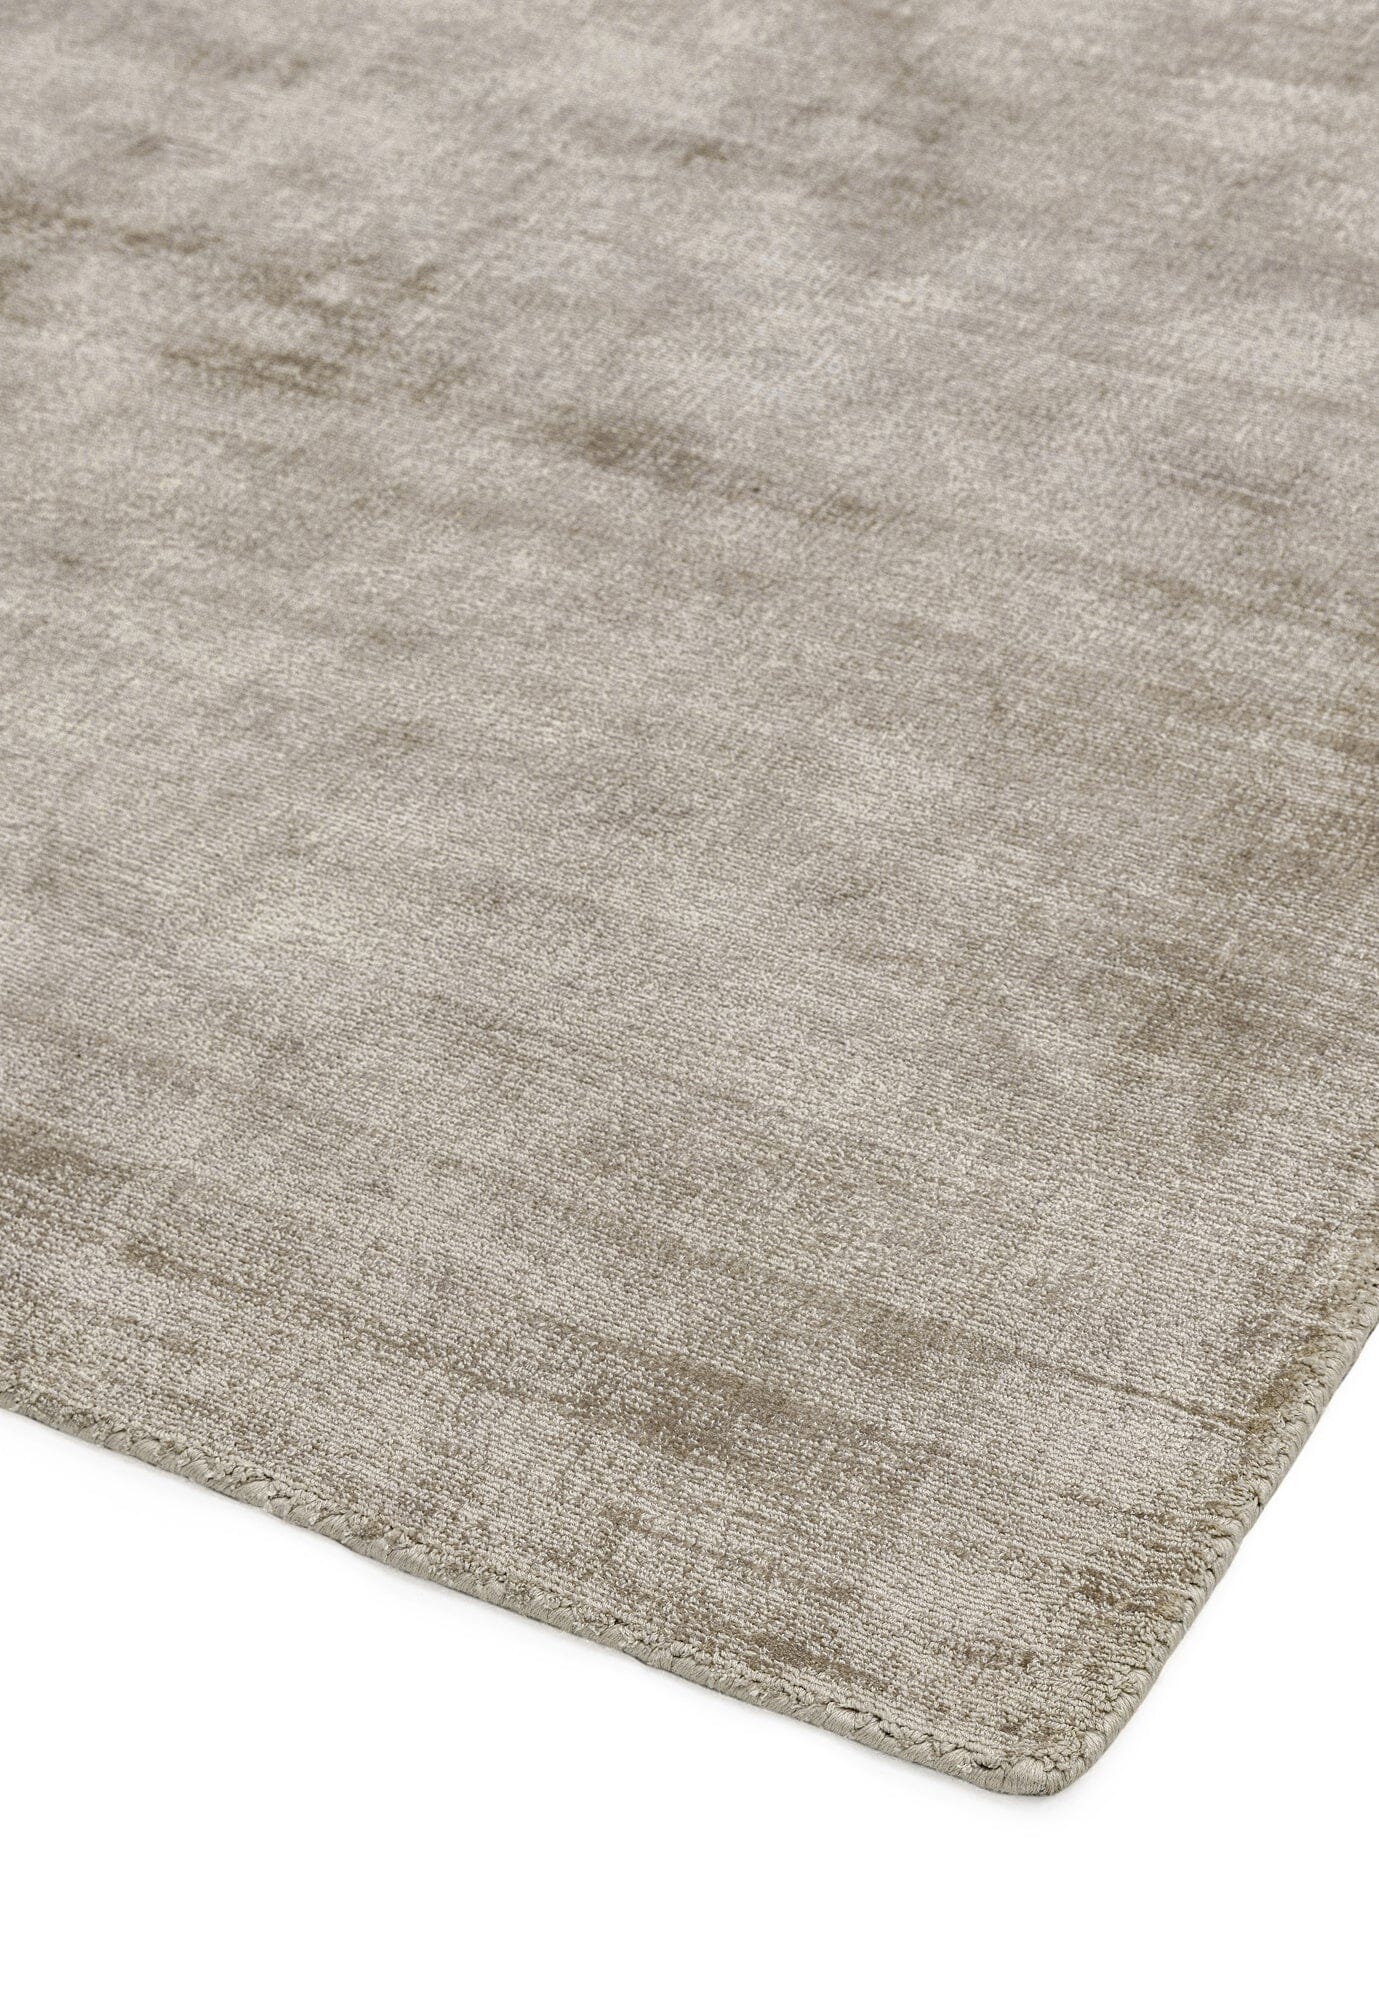  Asiatic Carpets-Asiatic Carpets Blade Hand Woven Rug Smoke - 160 x 230cm-Grey, Silver 925 